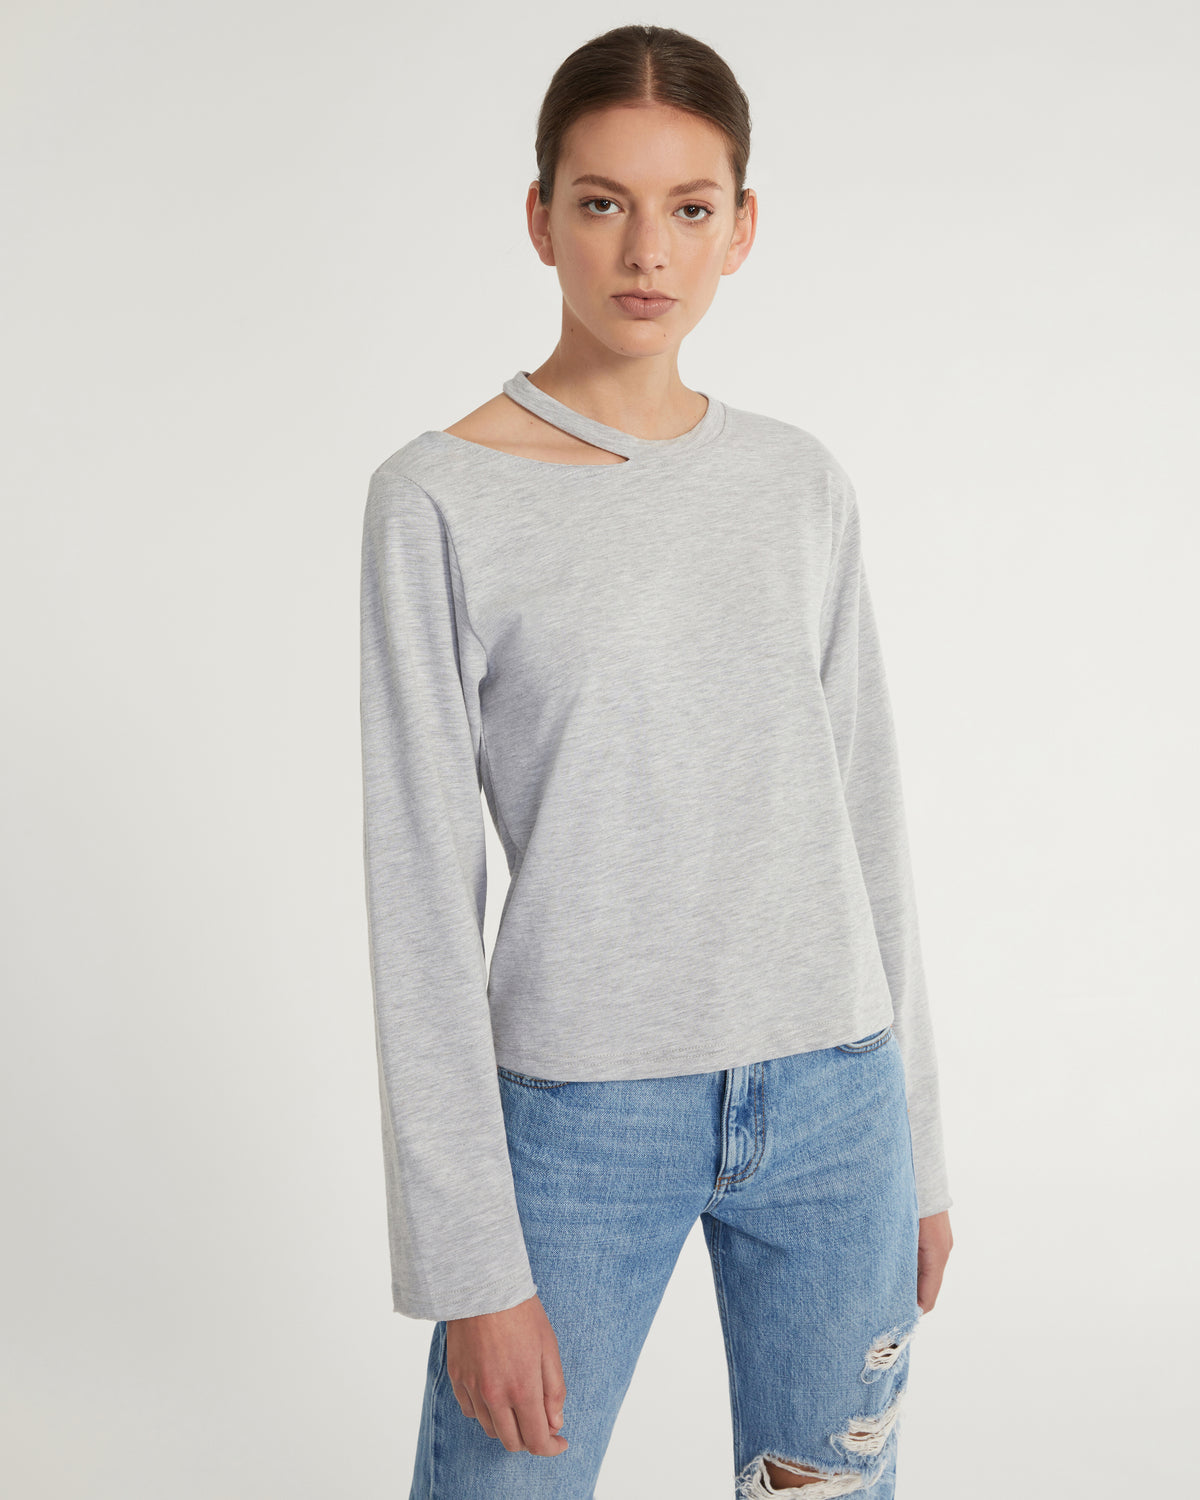 Tate Cut Out Long Sleeve in Light Heather Grey